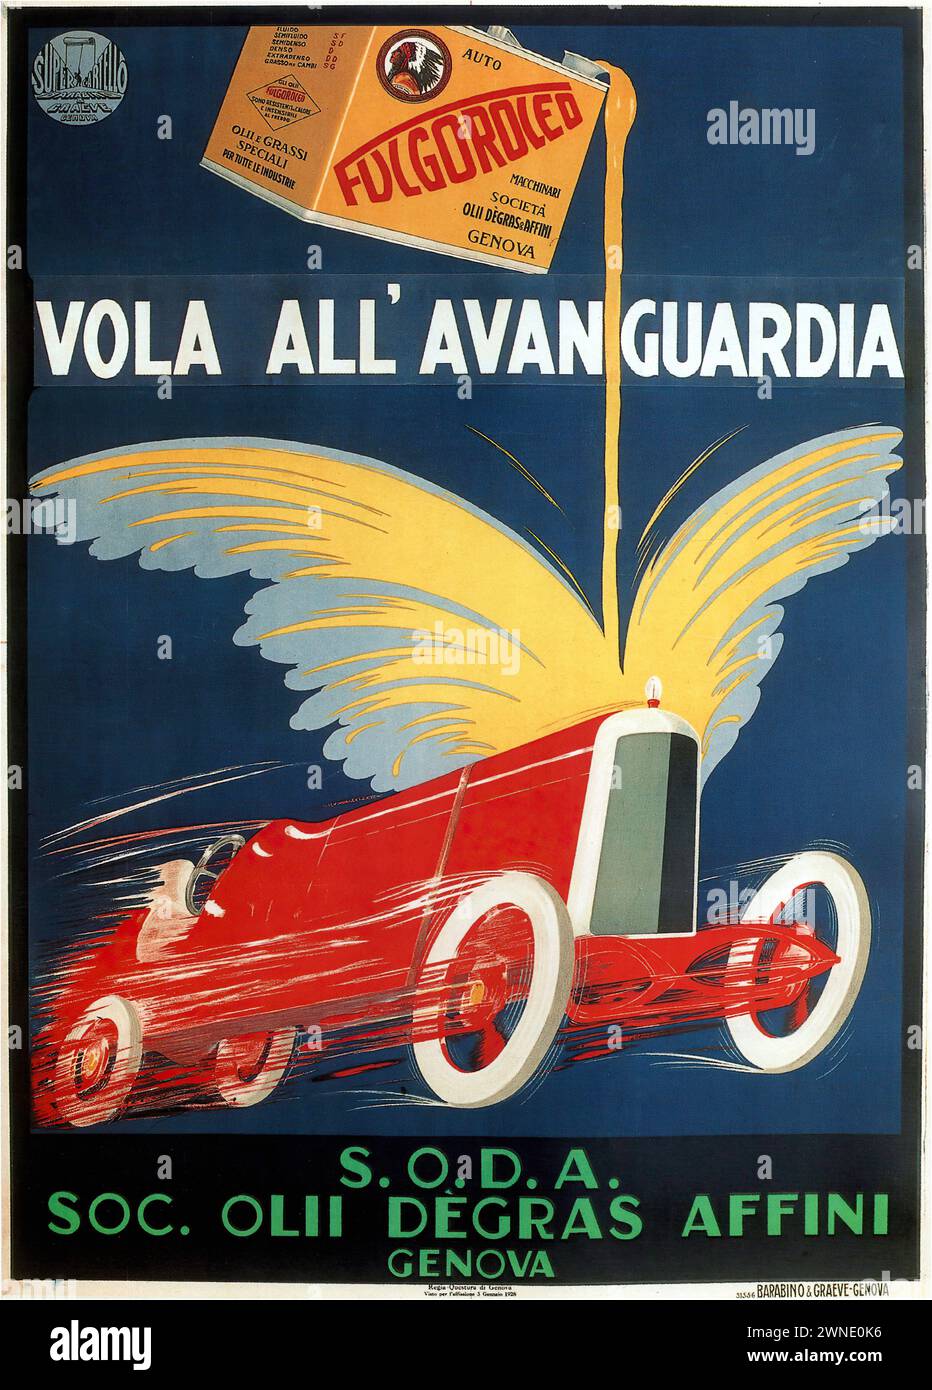 'VOLA ALL' AVANGUARDIA' 'S.O.D.A. SOC. OLI DEGRAS AFFINI GENOVA' [FLY TO THE AVANT-GARDE S.O.D.A. SOC. OILS DEGRAS AFFILIATES GENOA] Vintage Italian advertising poster featuring a stylized red car with a large white candle on the front, symbolizing speed and modernity. The graphic style is reminiscent of the Futurism art movement, emphasizing dynamism and the technological triumph of the early 20th century Stock Photo